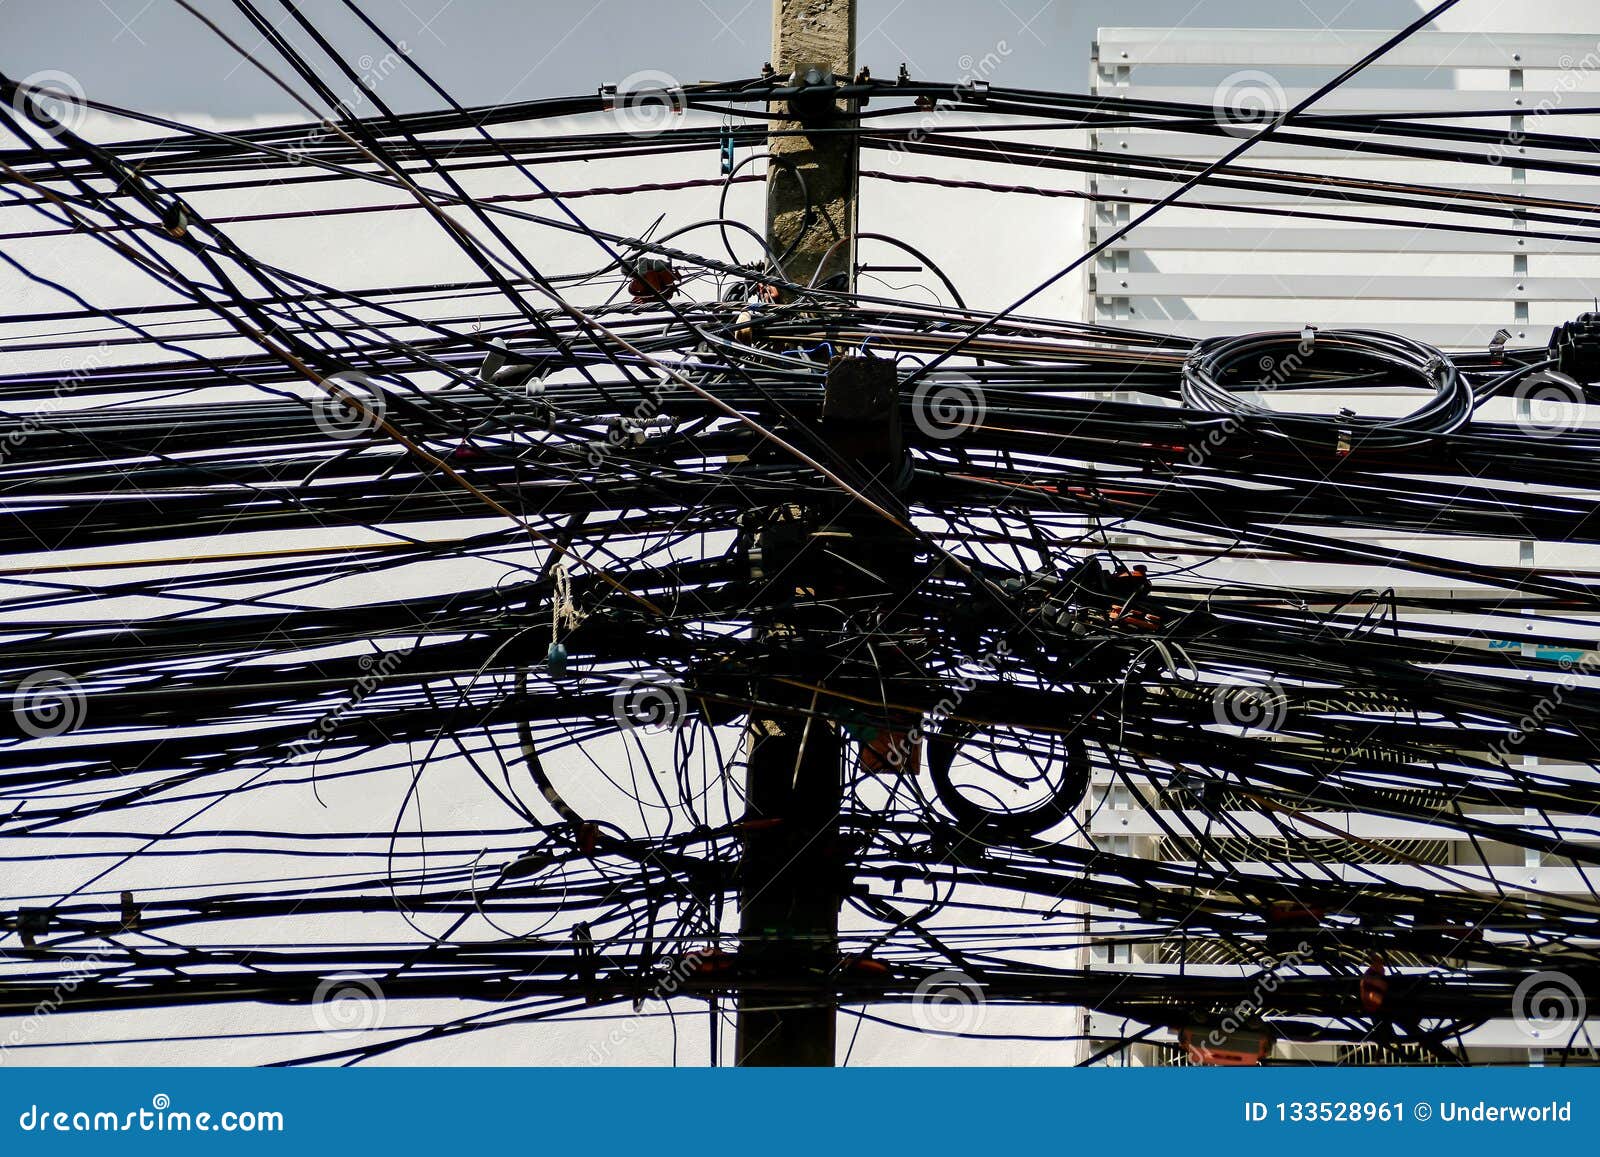 asian electrical cables caos, beautiful photo picture taken in thailand